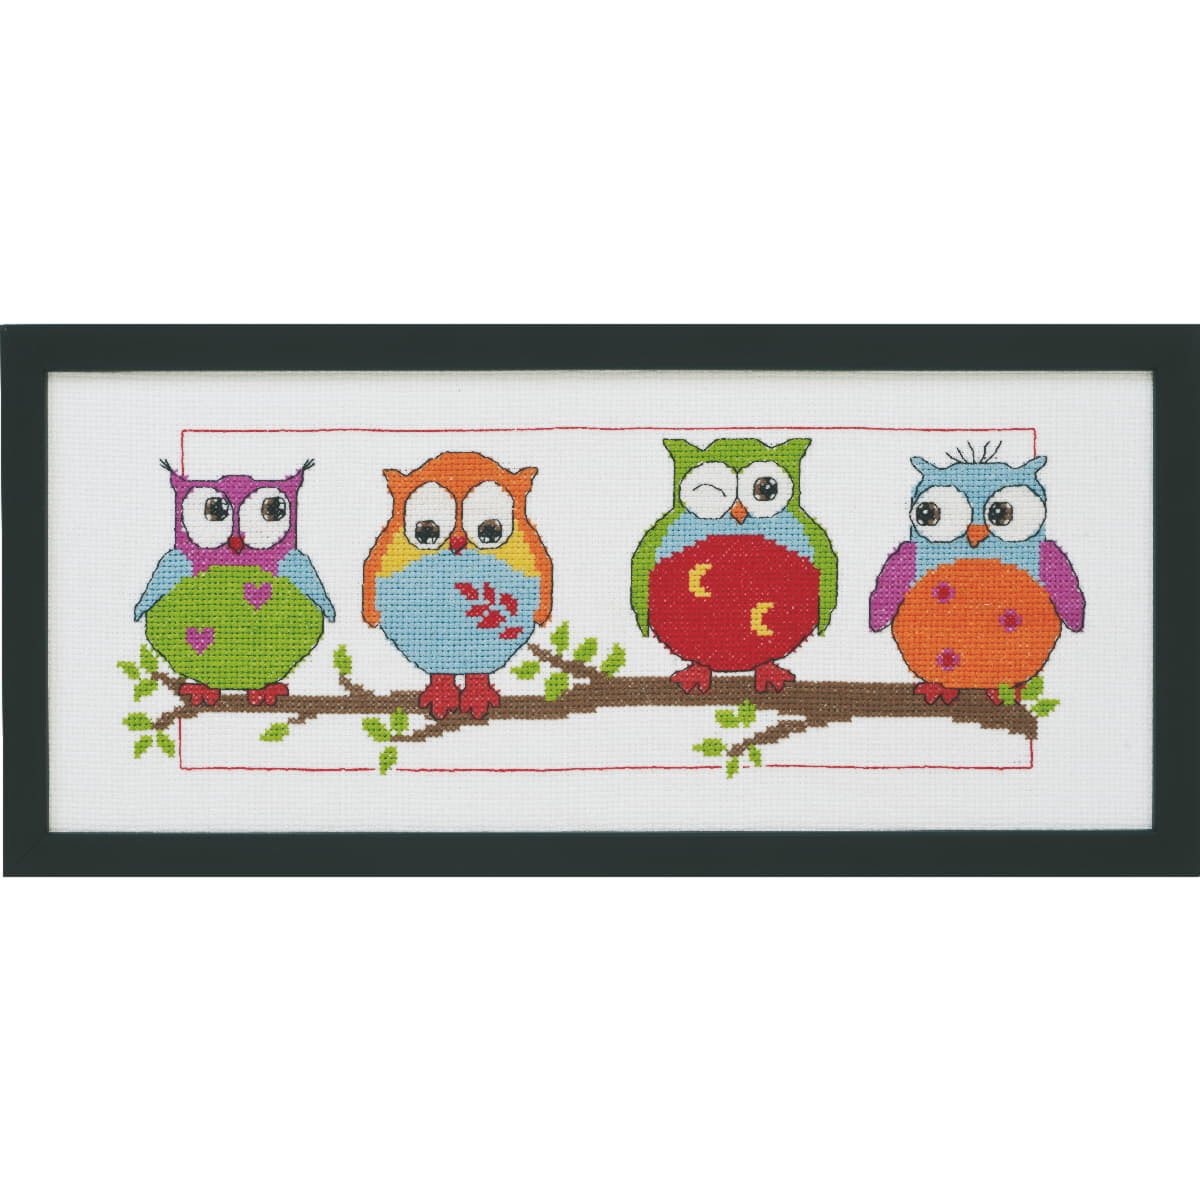 Permin counted cross stitch kit "Owls",...